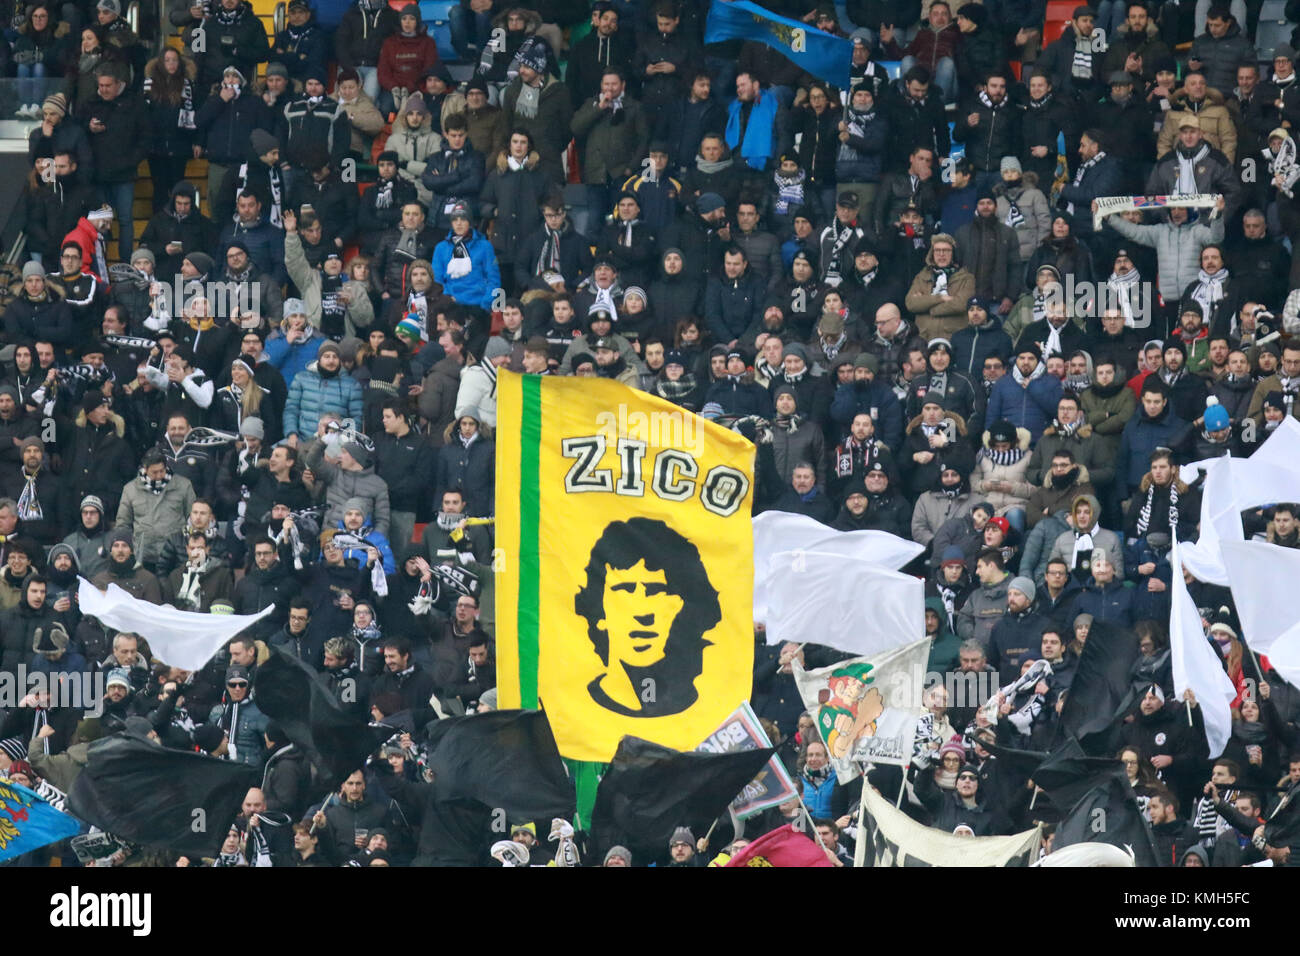 ITALY, Udine: Udinese's fans with Zico's flag former player during the  Serie A football match between Udinese Calcio v Benevento Calcio at Dacia  Arena Stadium on 10th Dicember, 2017. Credit: Andrea Spinelli/Alamy